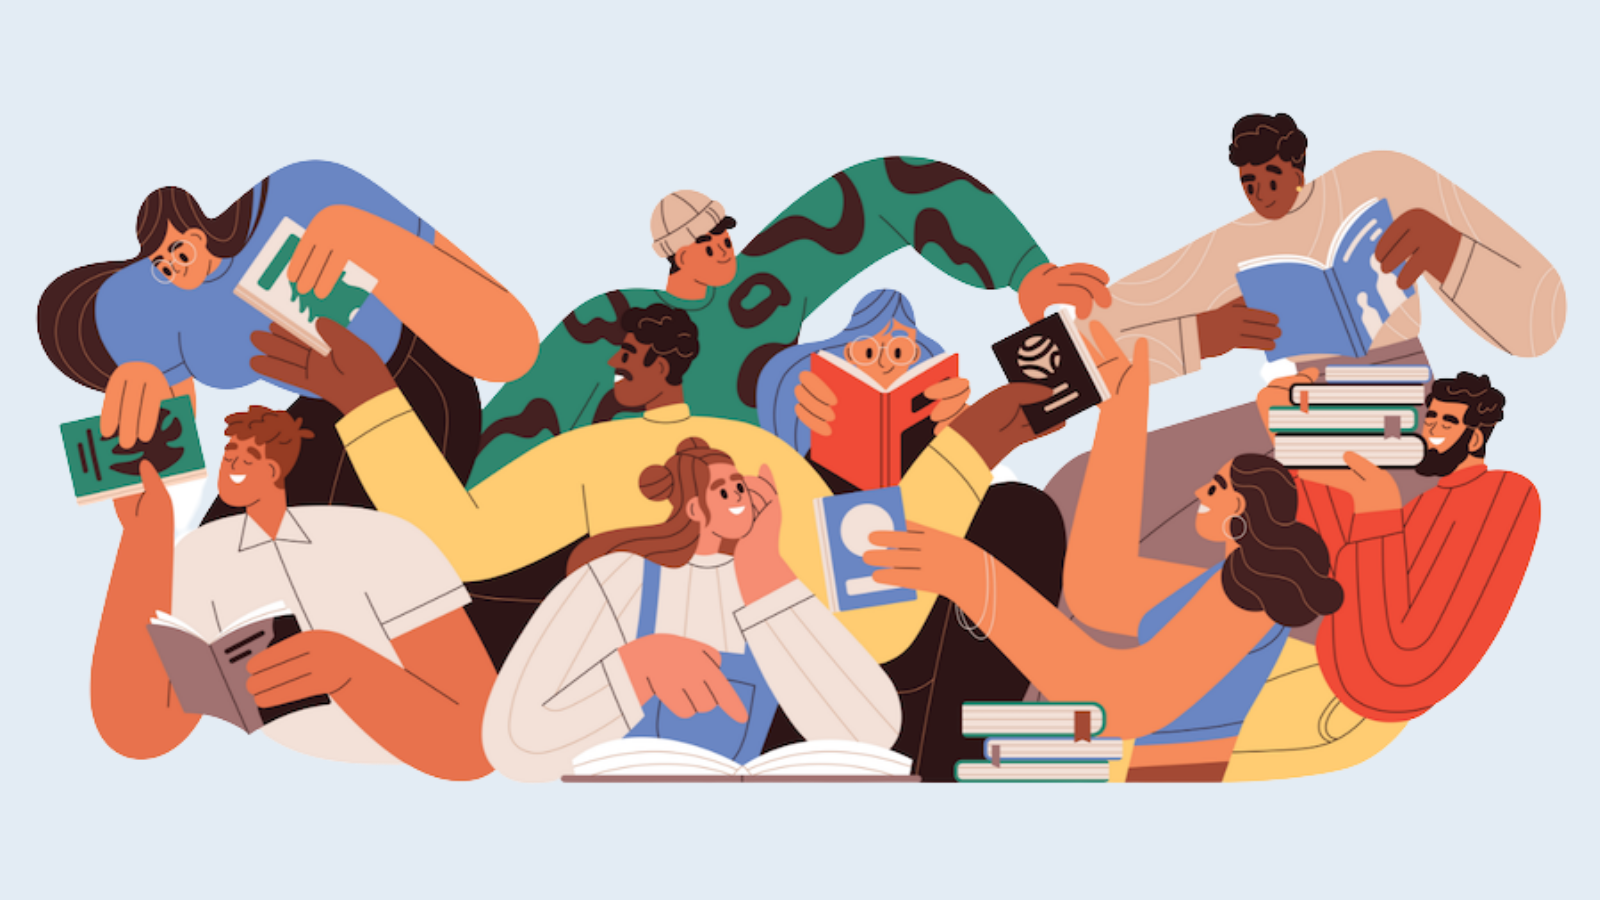 Illustration of people reading and sharing books